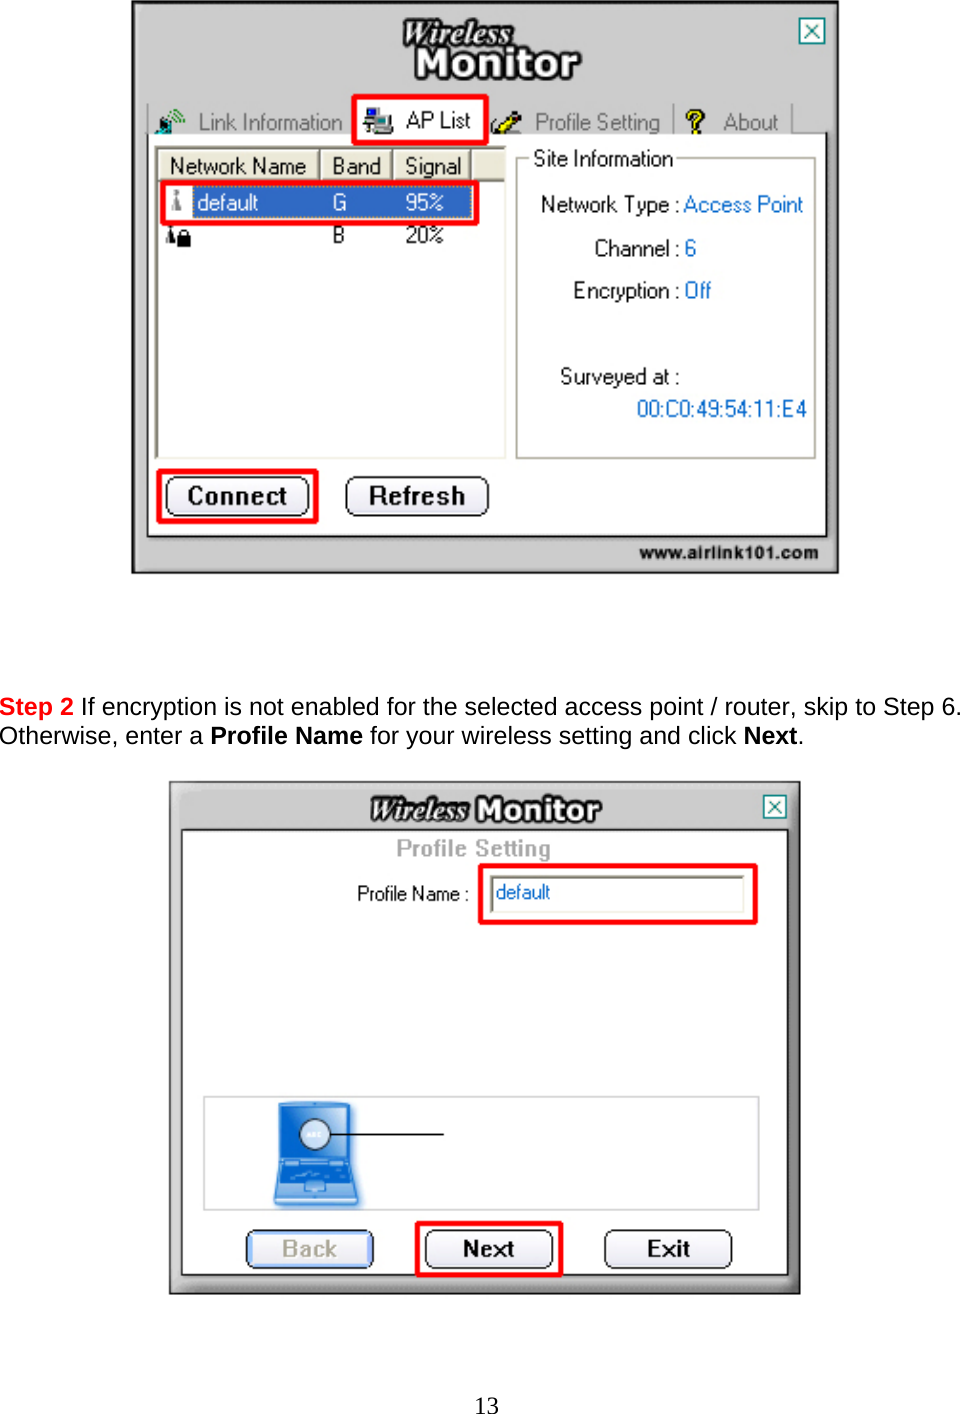 13      Step 2 If encryption is not enabled for the selected access point / router, skip to Step 6. Otherwise, enter a Profile Name for your wireless setting and click Next.    